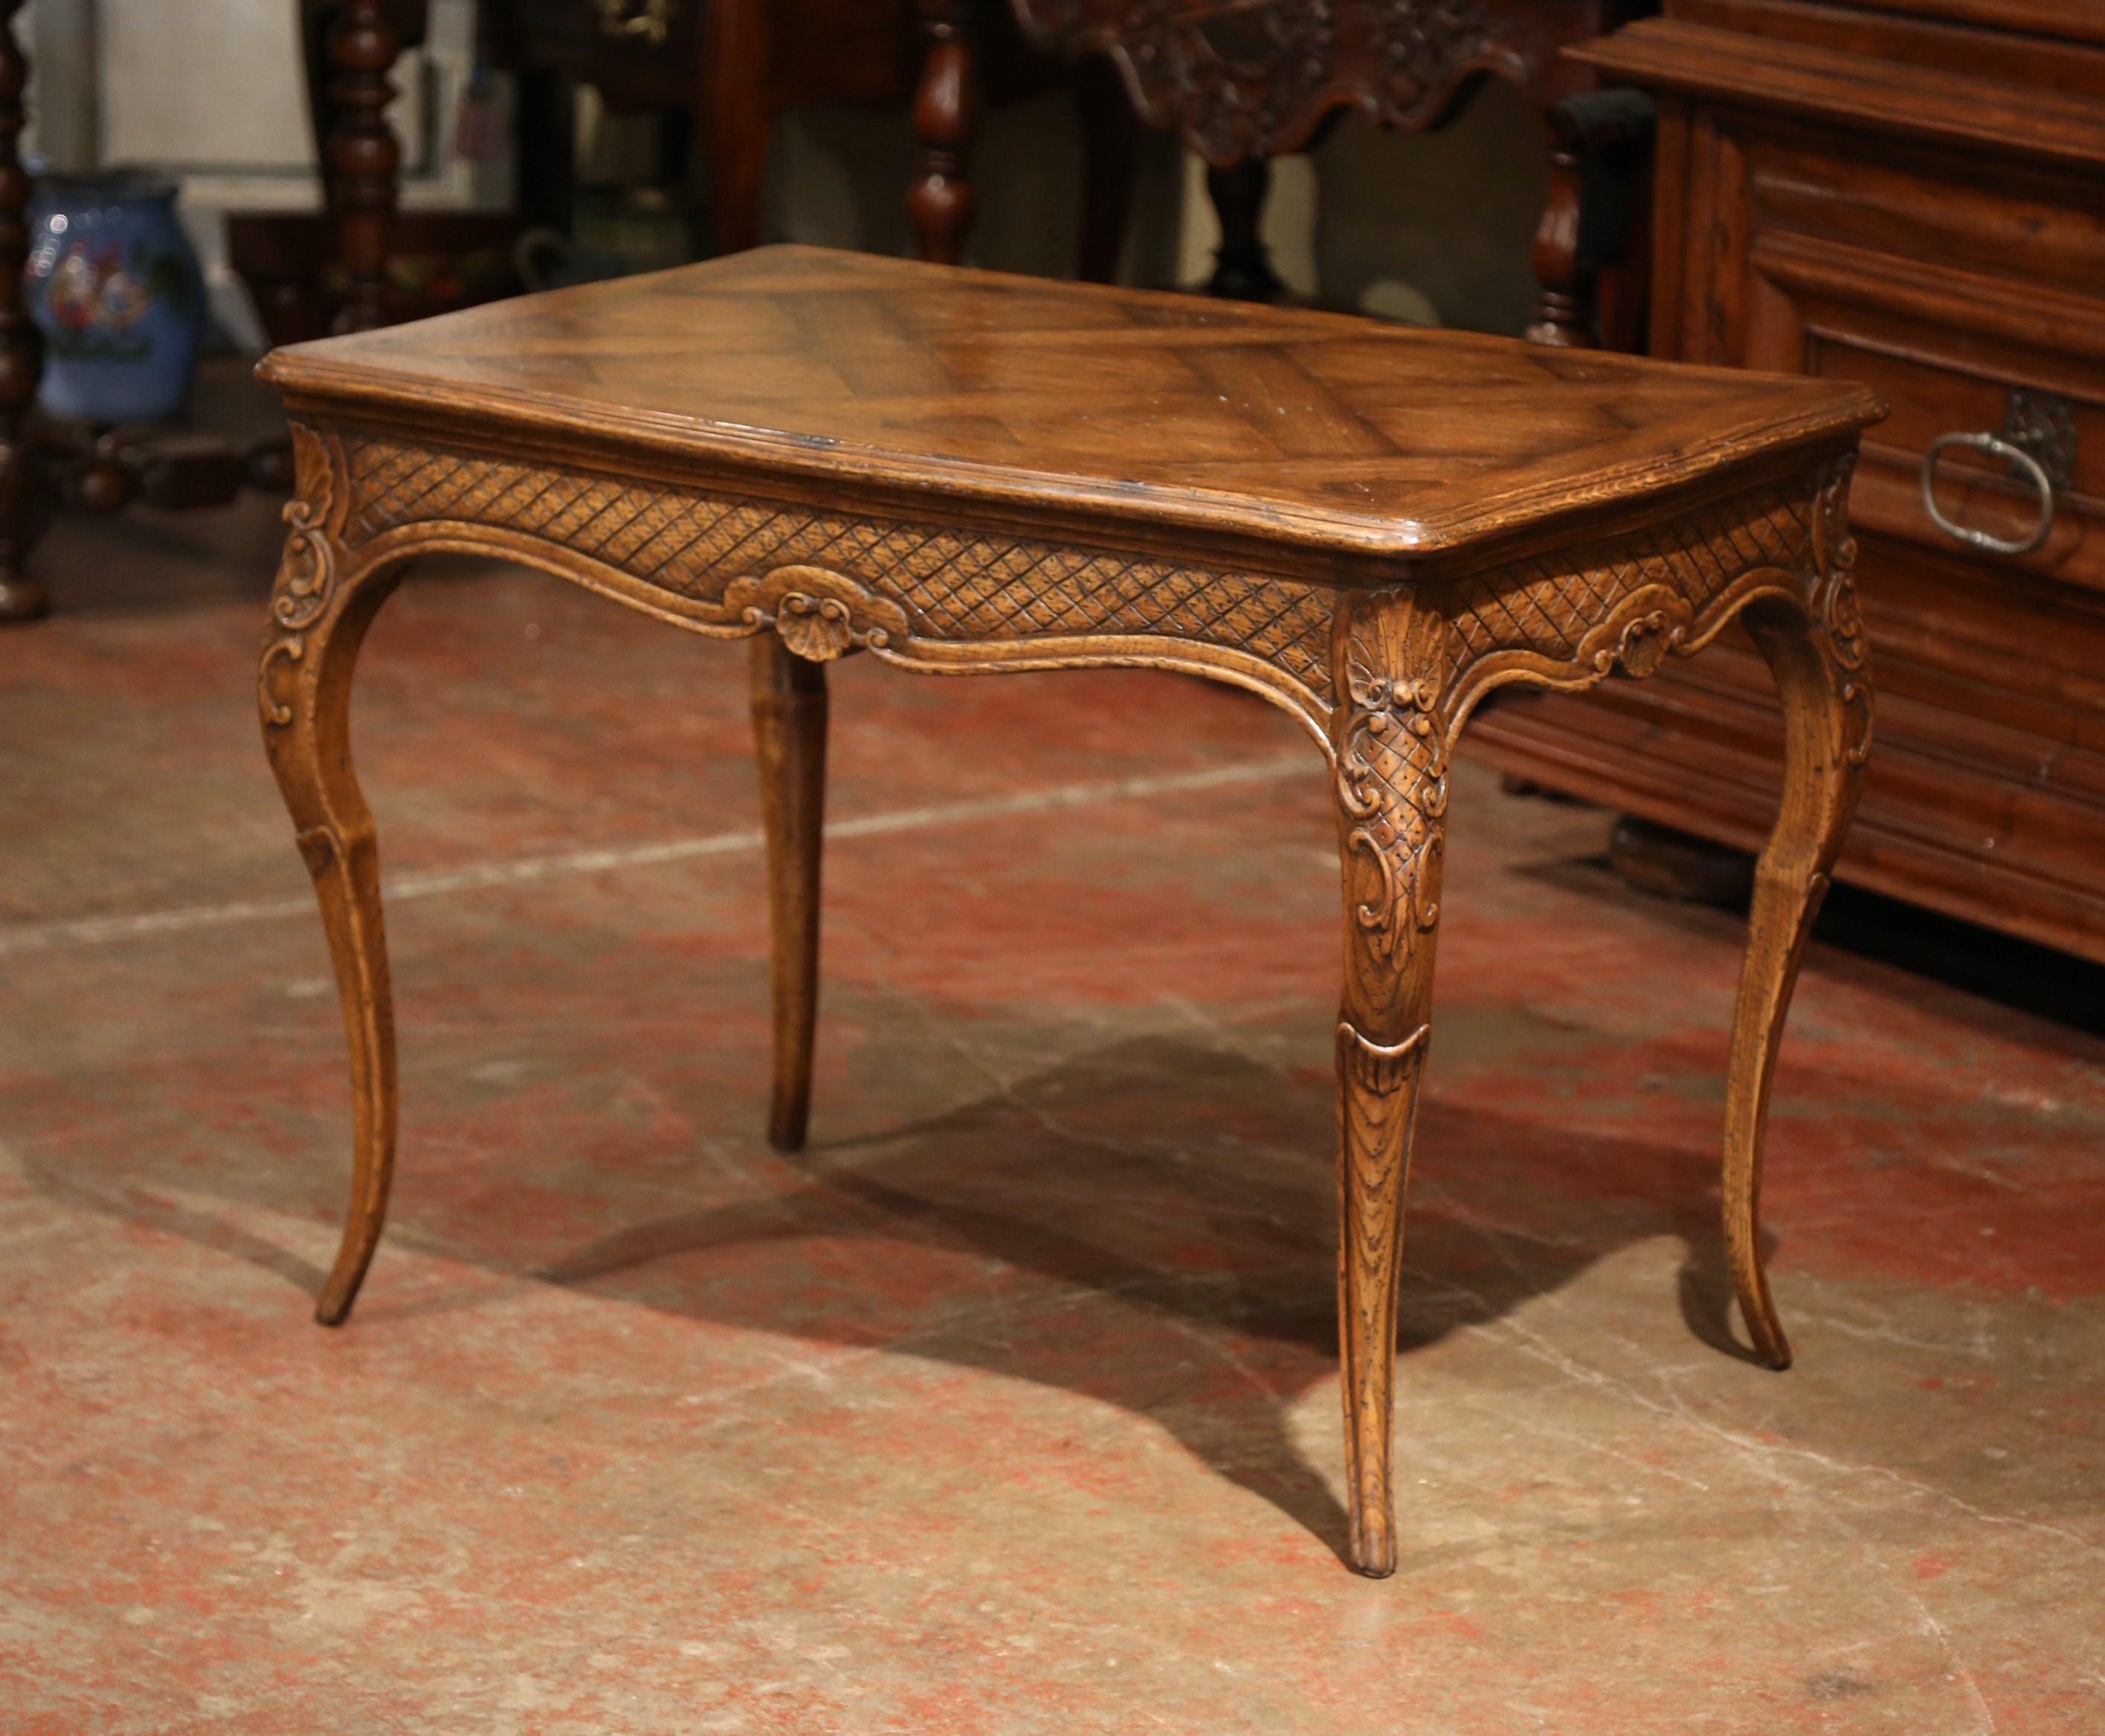 Midcentury French Louis XV Carved Oak Side Table with Inlay Parquetry Decor In Excellent Condition For Sale In Dallas, TX